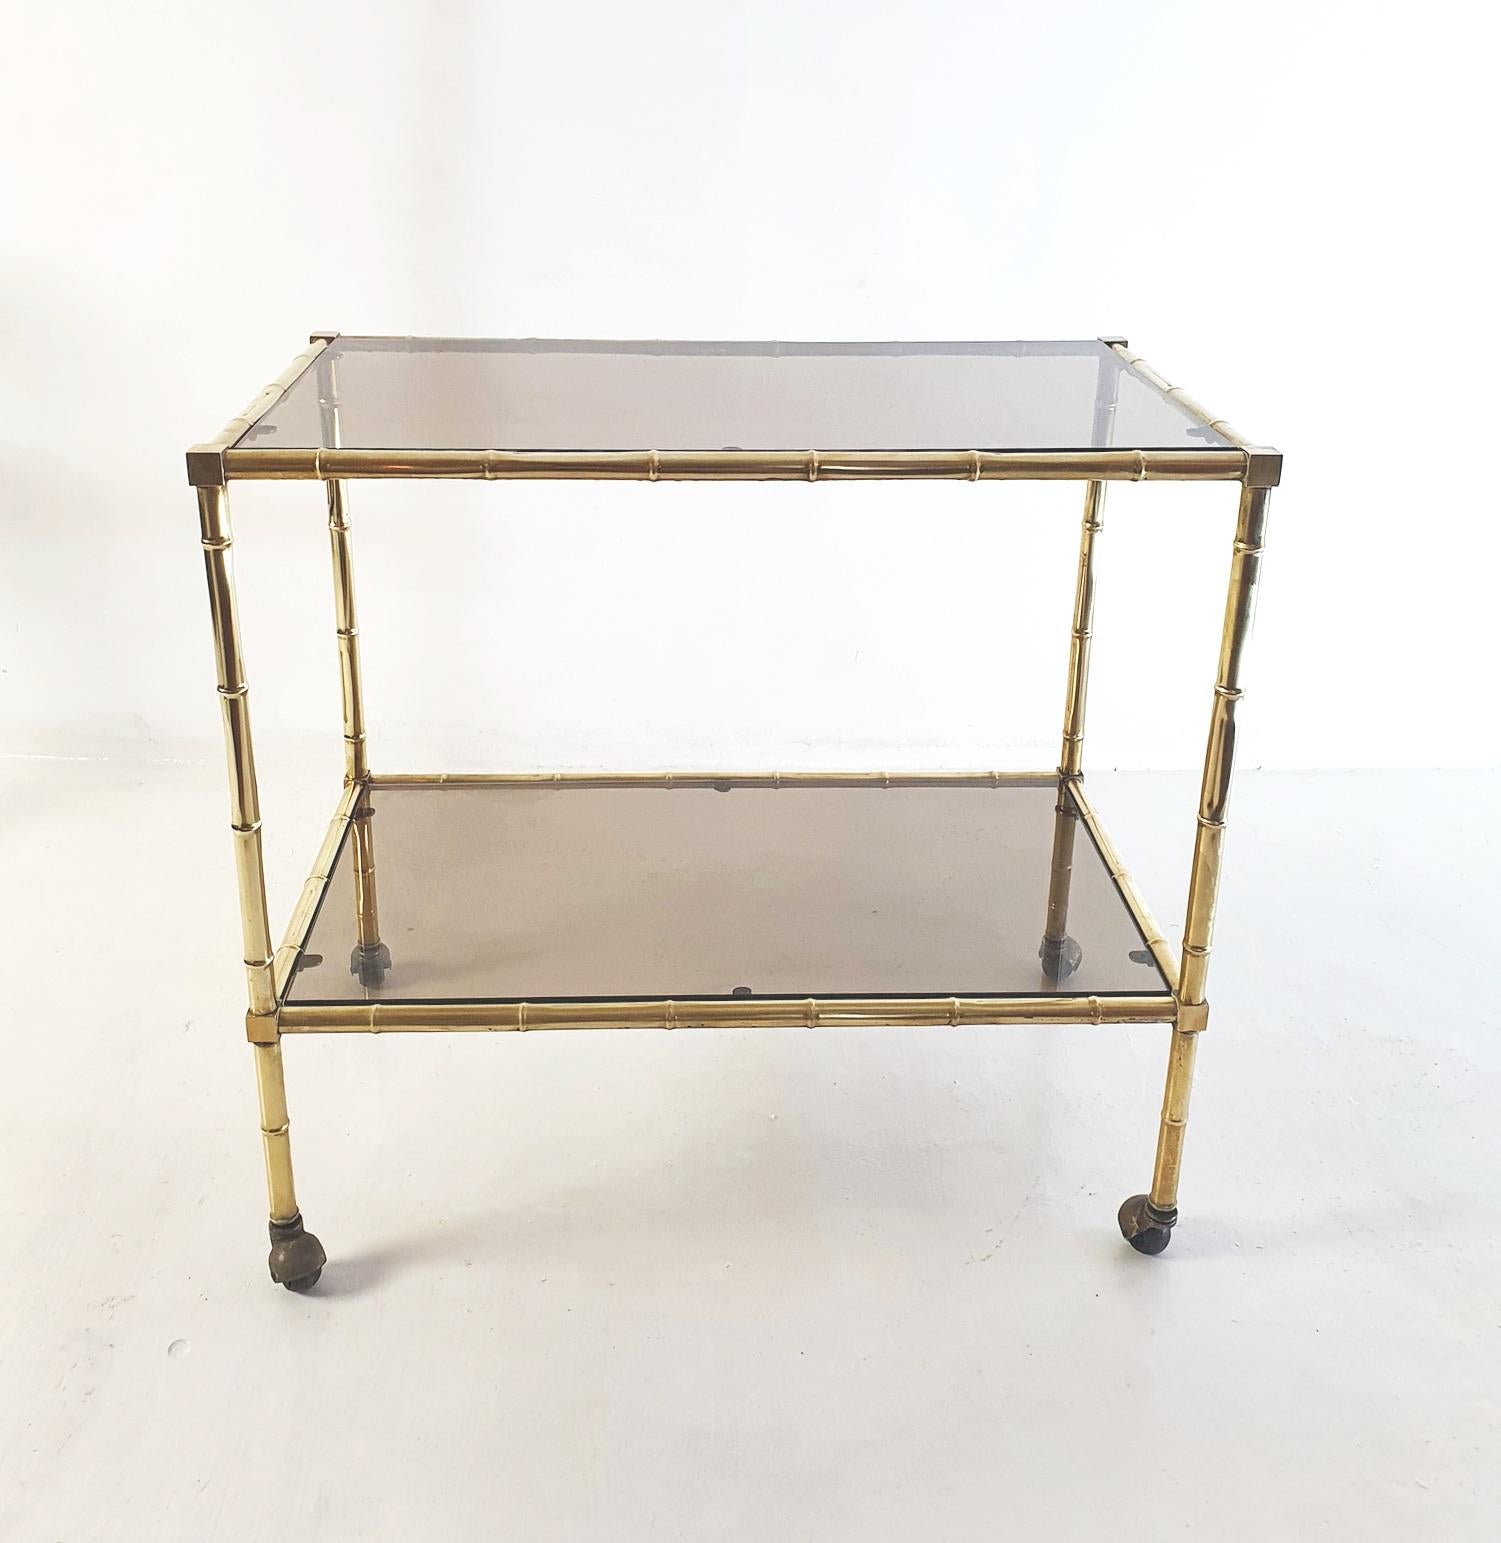 A two tiered bar cart in brass imitating bamboo and smoked glass produced during the 1970's by Maison Baguès. With original castors which works well.
Perfect as a bar or a side table.